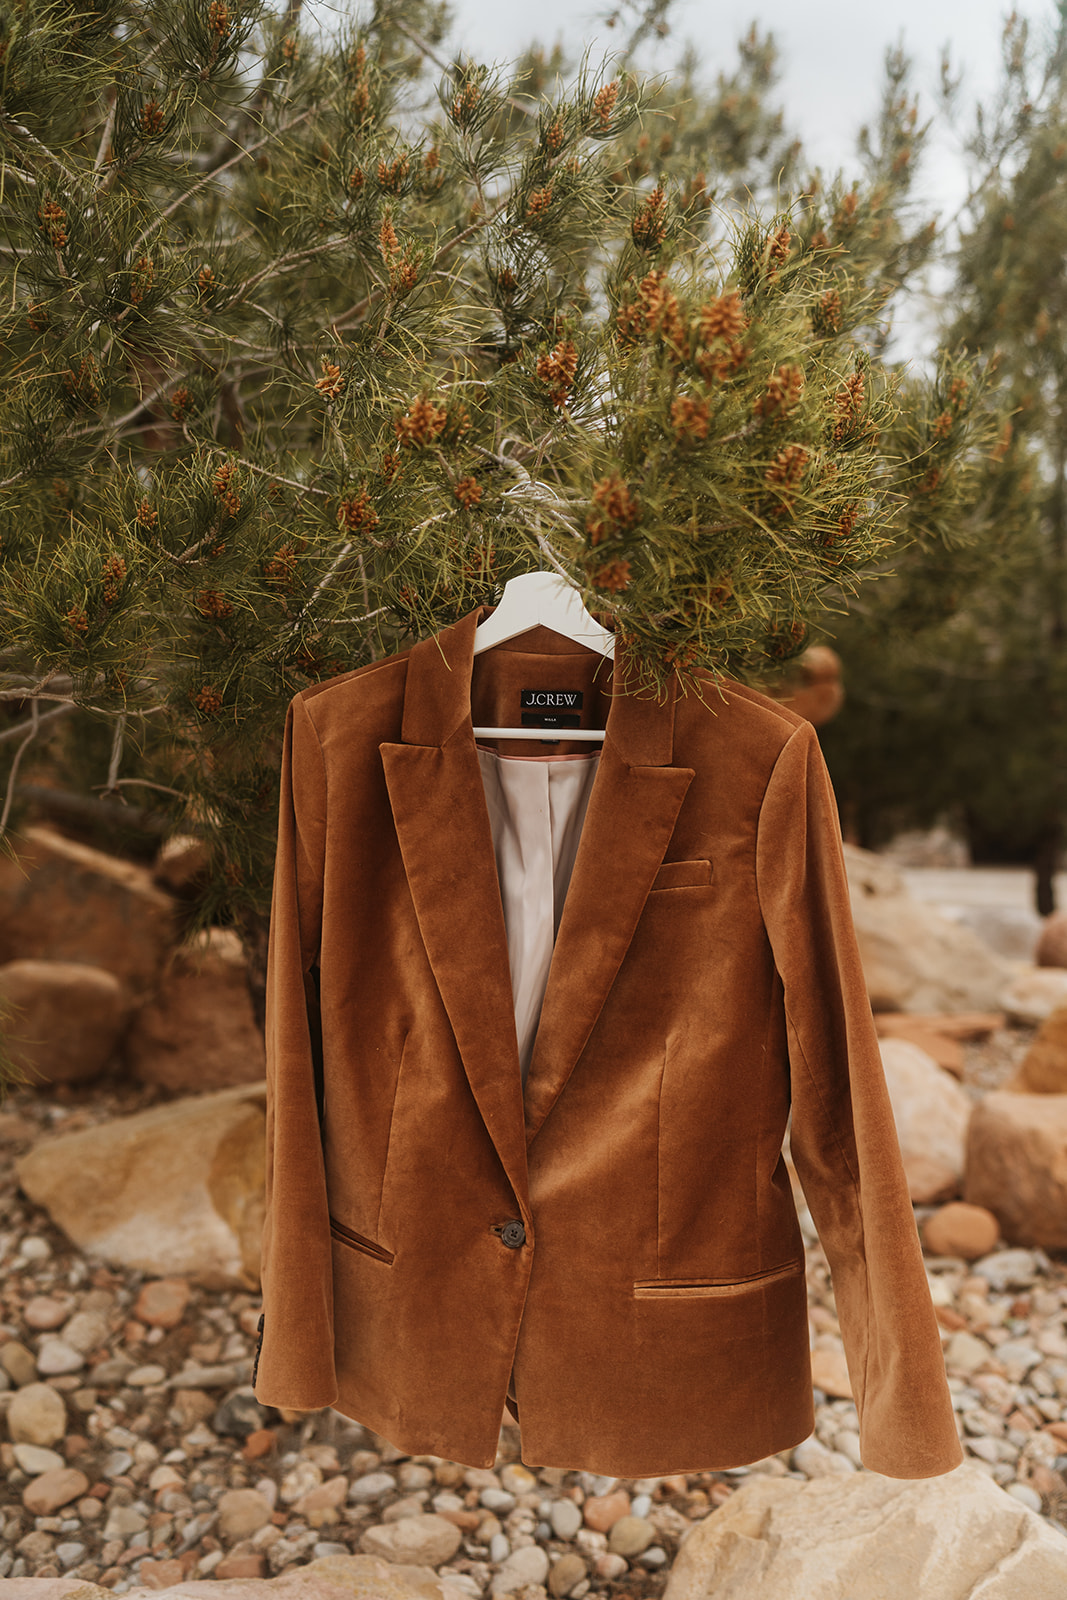 A brown Velvet jacket from J Crew hanging on a hanger on the branch of a tree 